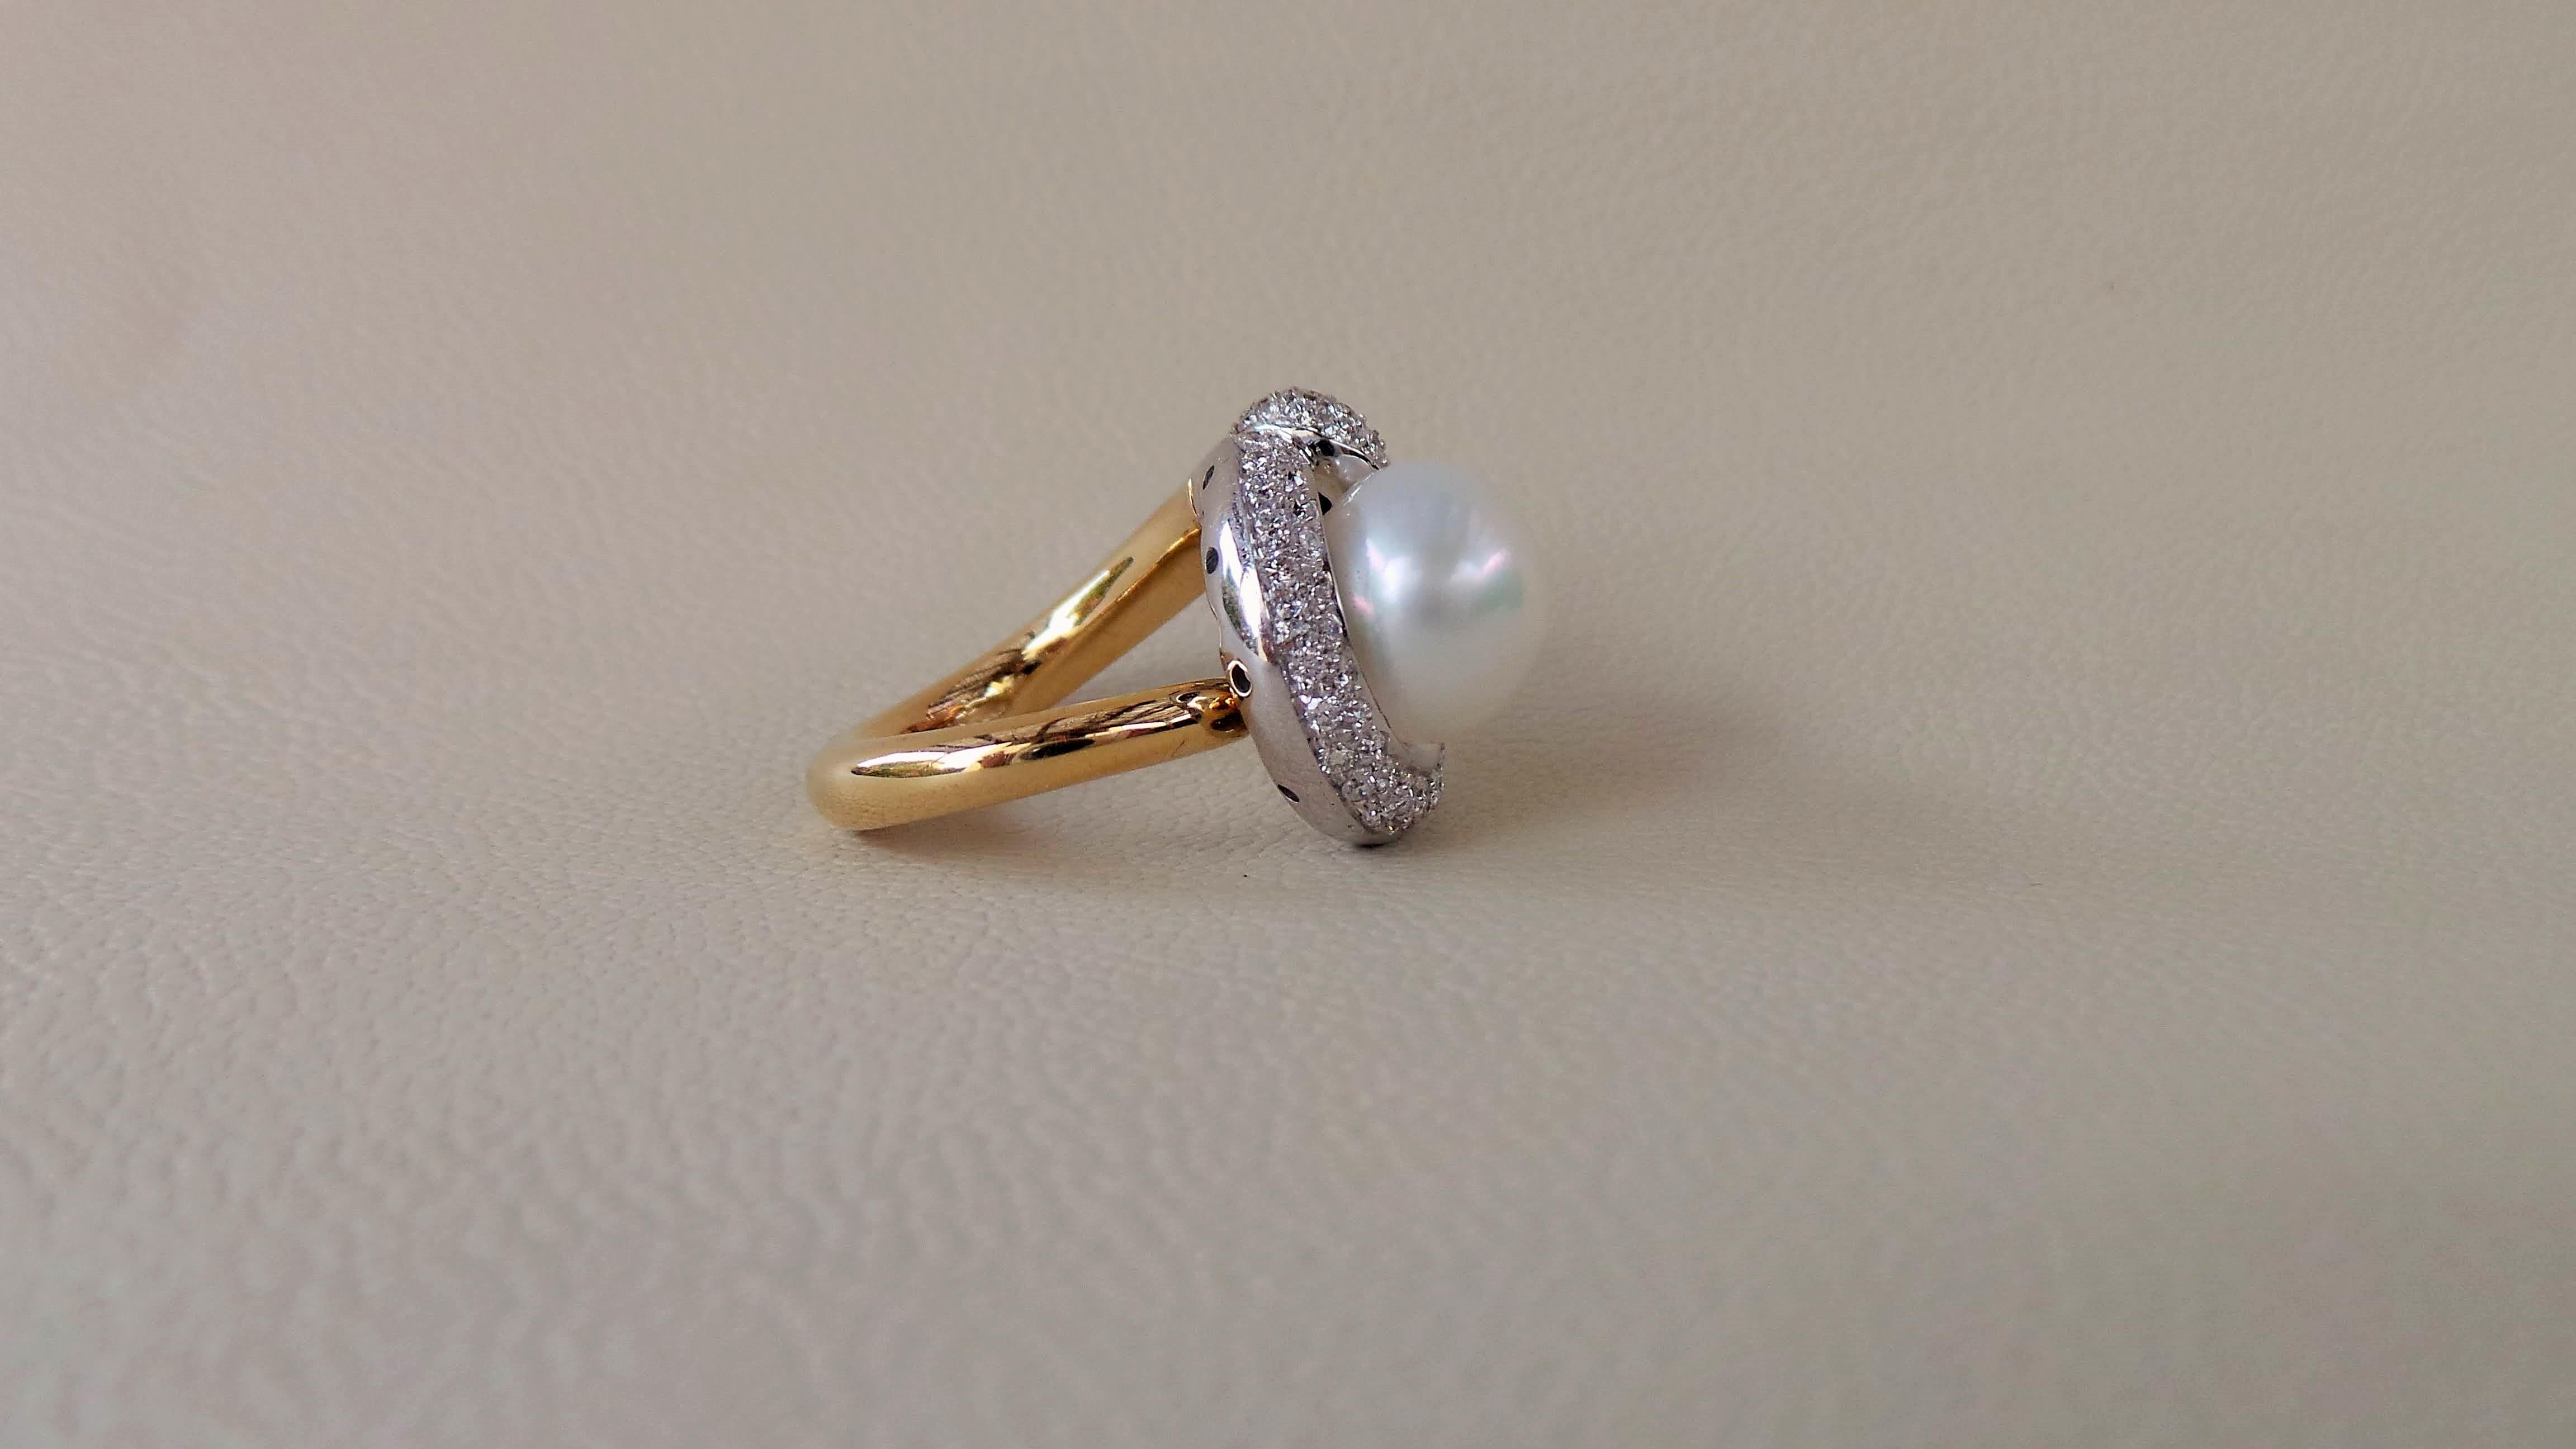 Andrea Macinai design a dedicated collection for cocktail rings  with a perl and diamonds.
A 12 mm Australian pearl is surrounded by round diamonds white cut brilliant in yellow and white gold cocktail ring. 
The ring was designed and made following